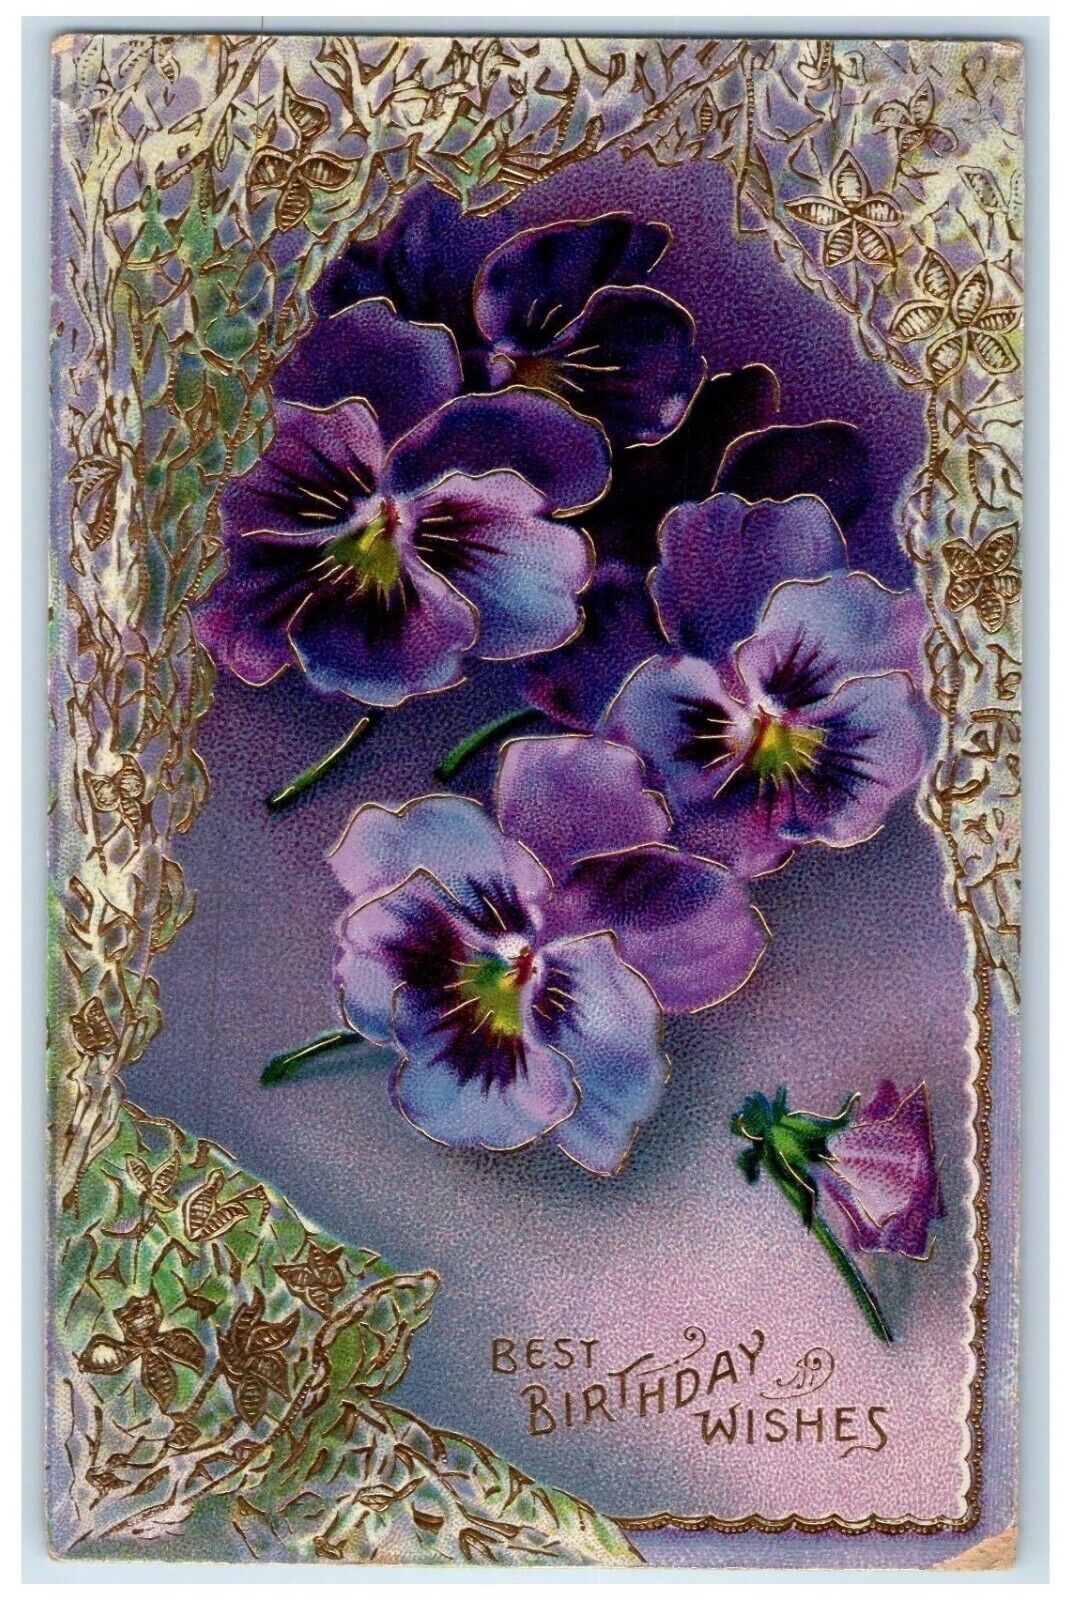 c1910's Birthday Wishes Flowers Gel Gold Gilt Embossed Posted Antique Postcard